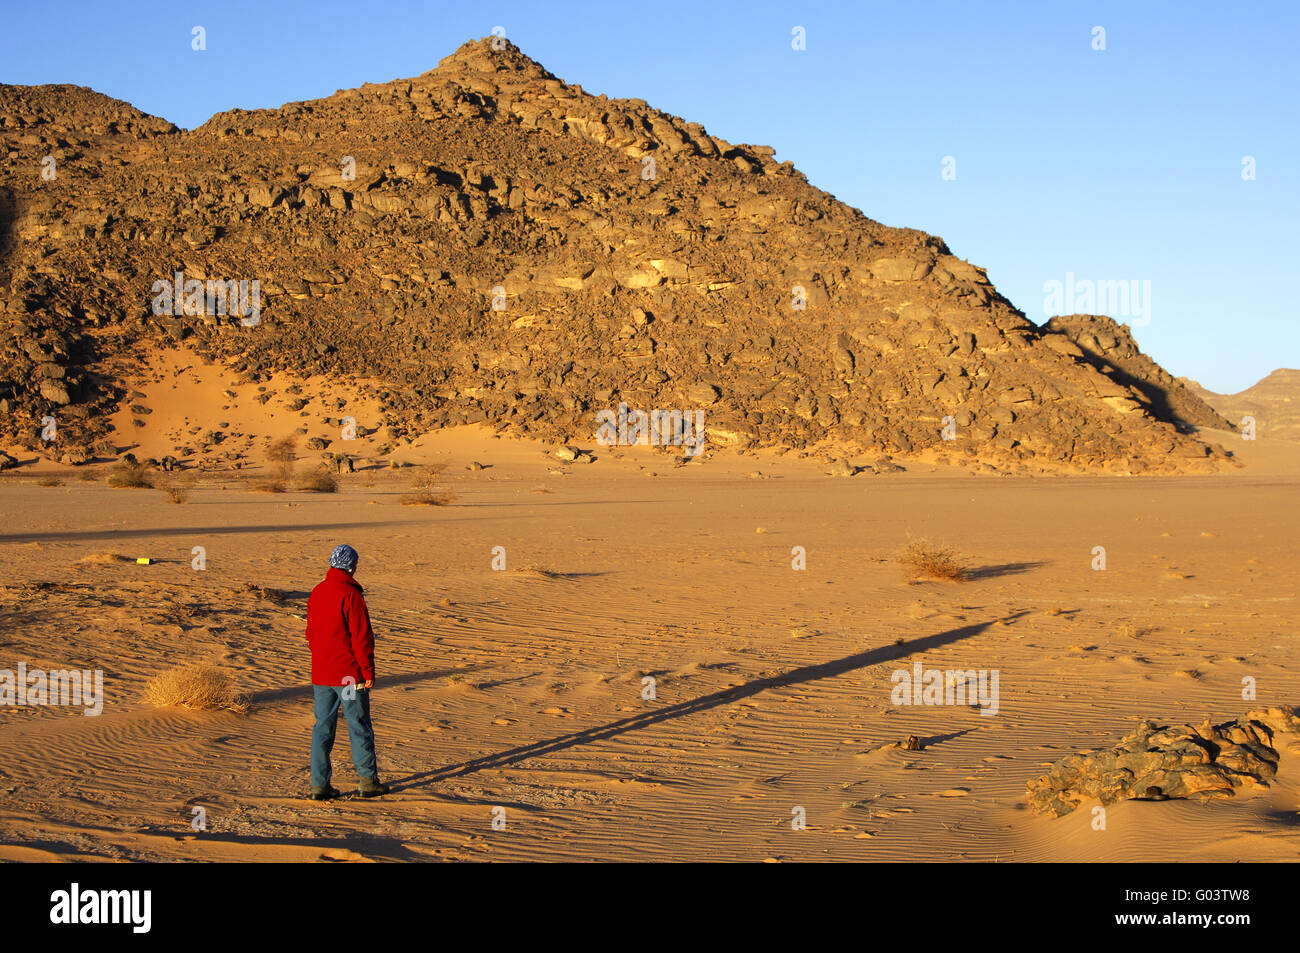 A  person casts a long shadow in a desert Stock Photo